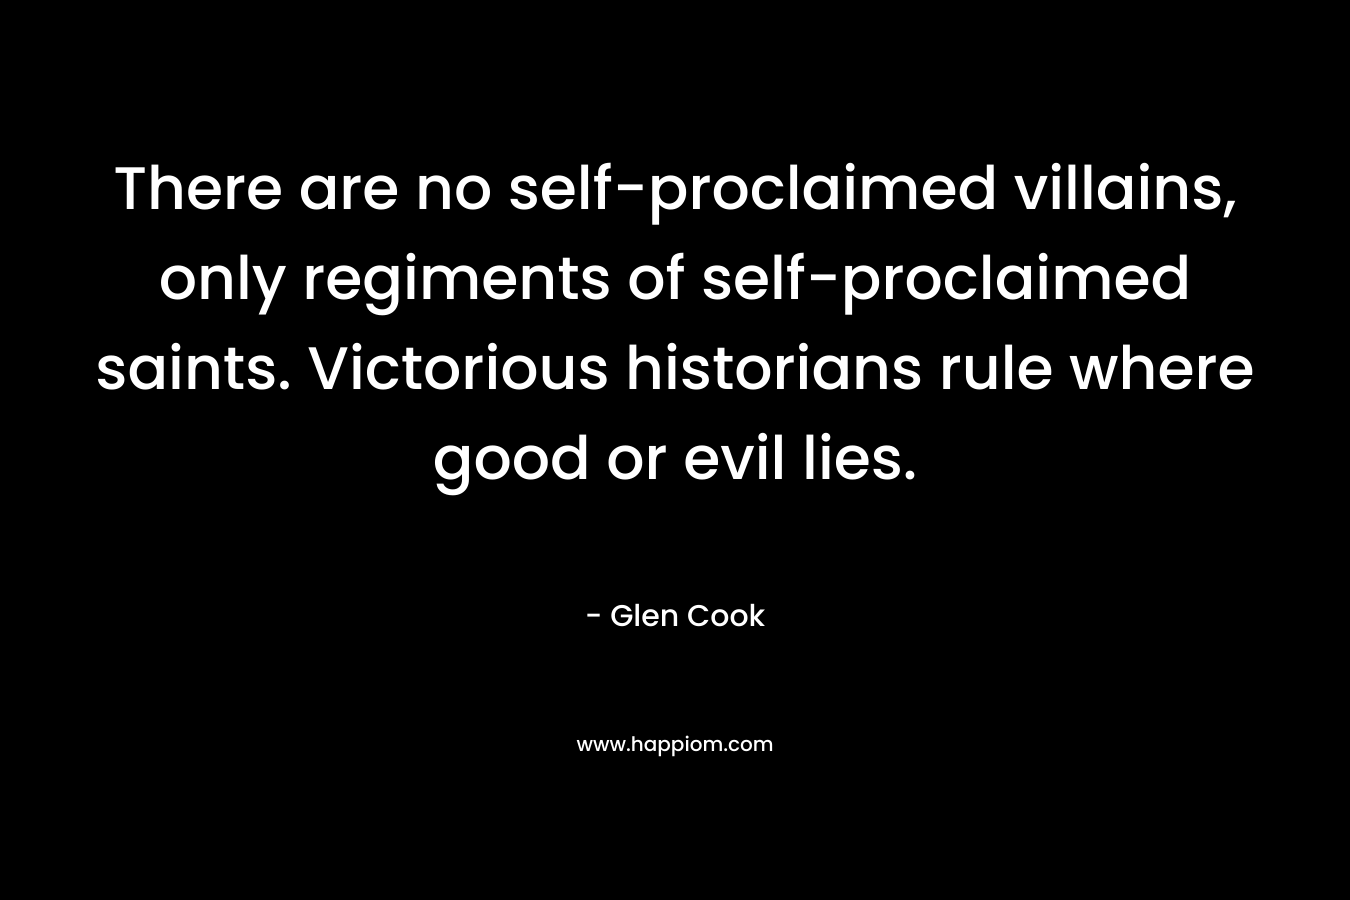 There are no self-proclaimed villains, only regiments of self-proclaimed saints. Victorious historians rule where good or evil lies.